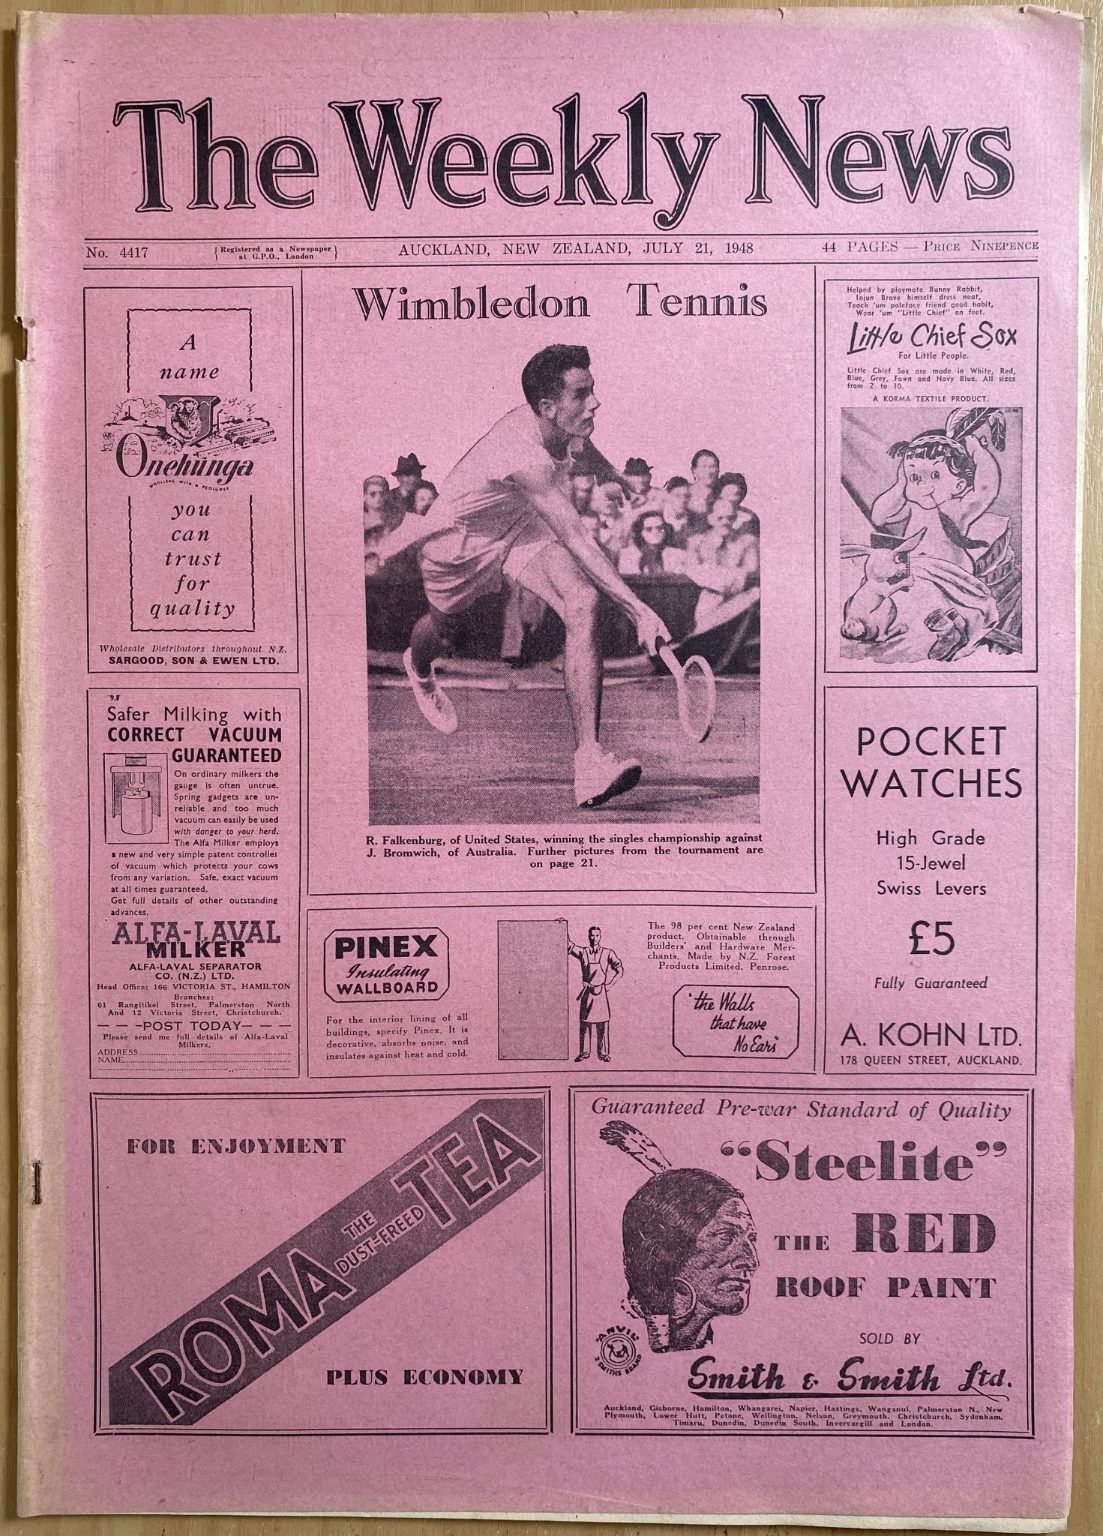 OLD NEWSPAPER: The Weekly News - No. 4417, 21 July 1948